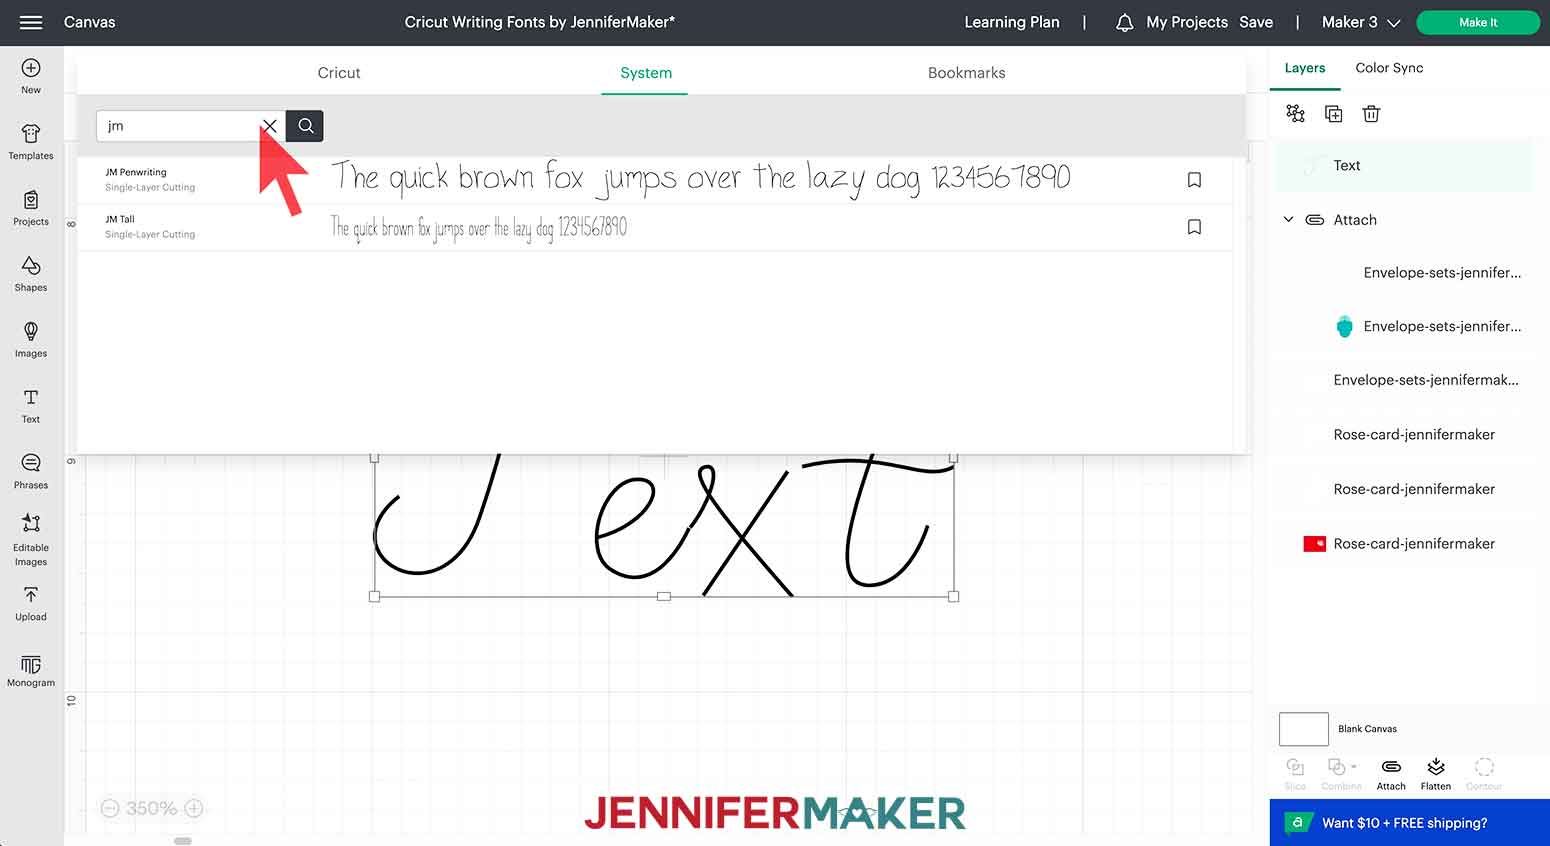 Search System fonts in Cricut Design Space to find uploaded fonts like JM Tall.